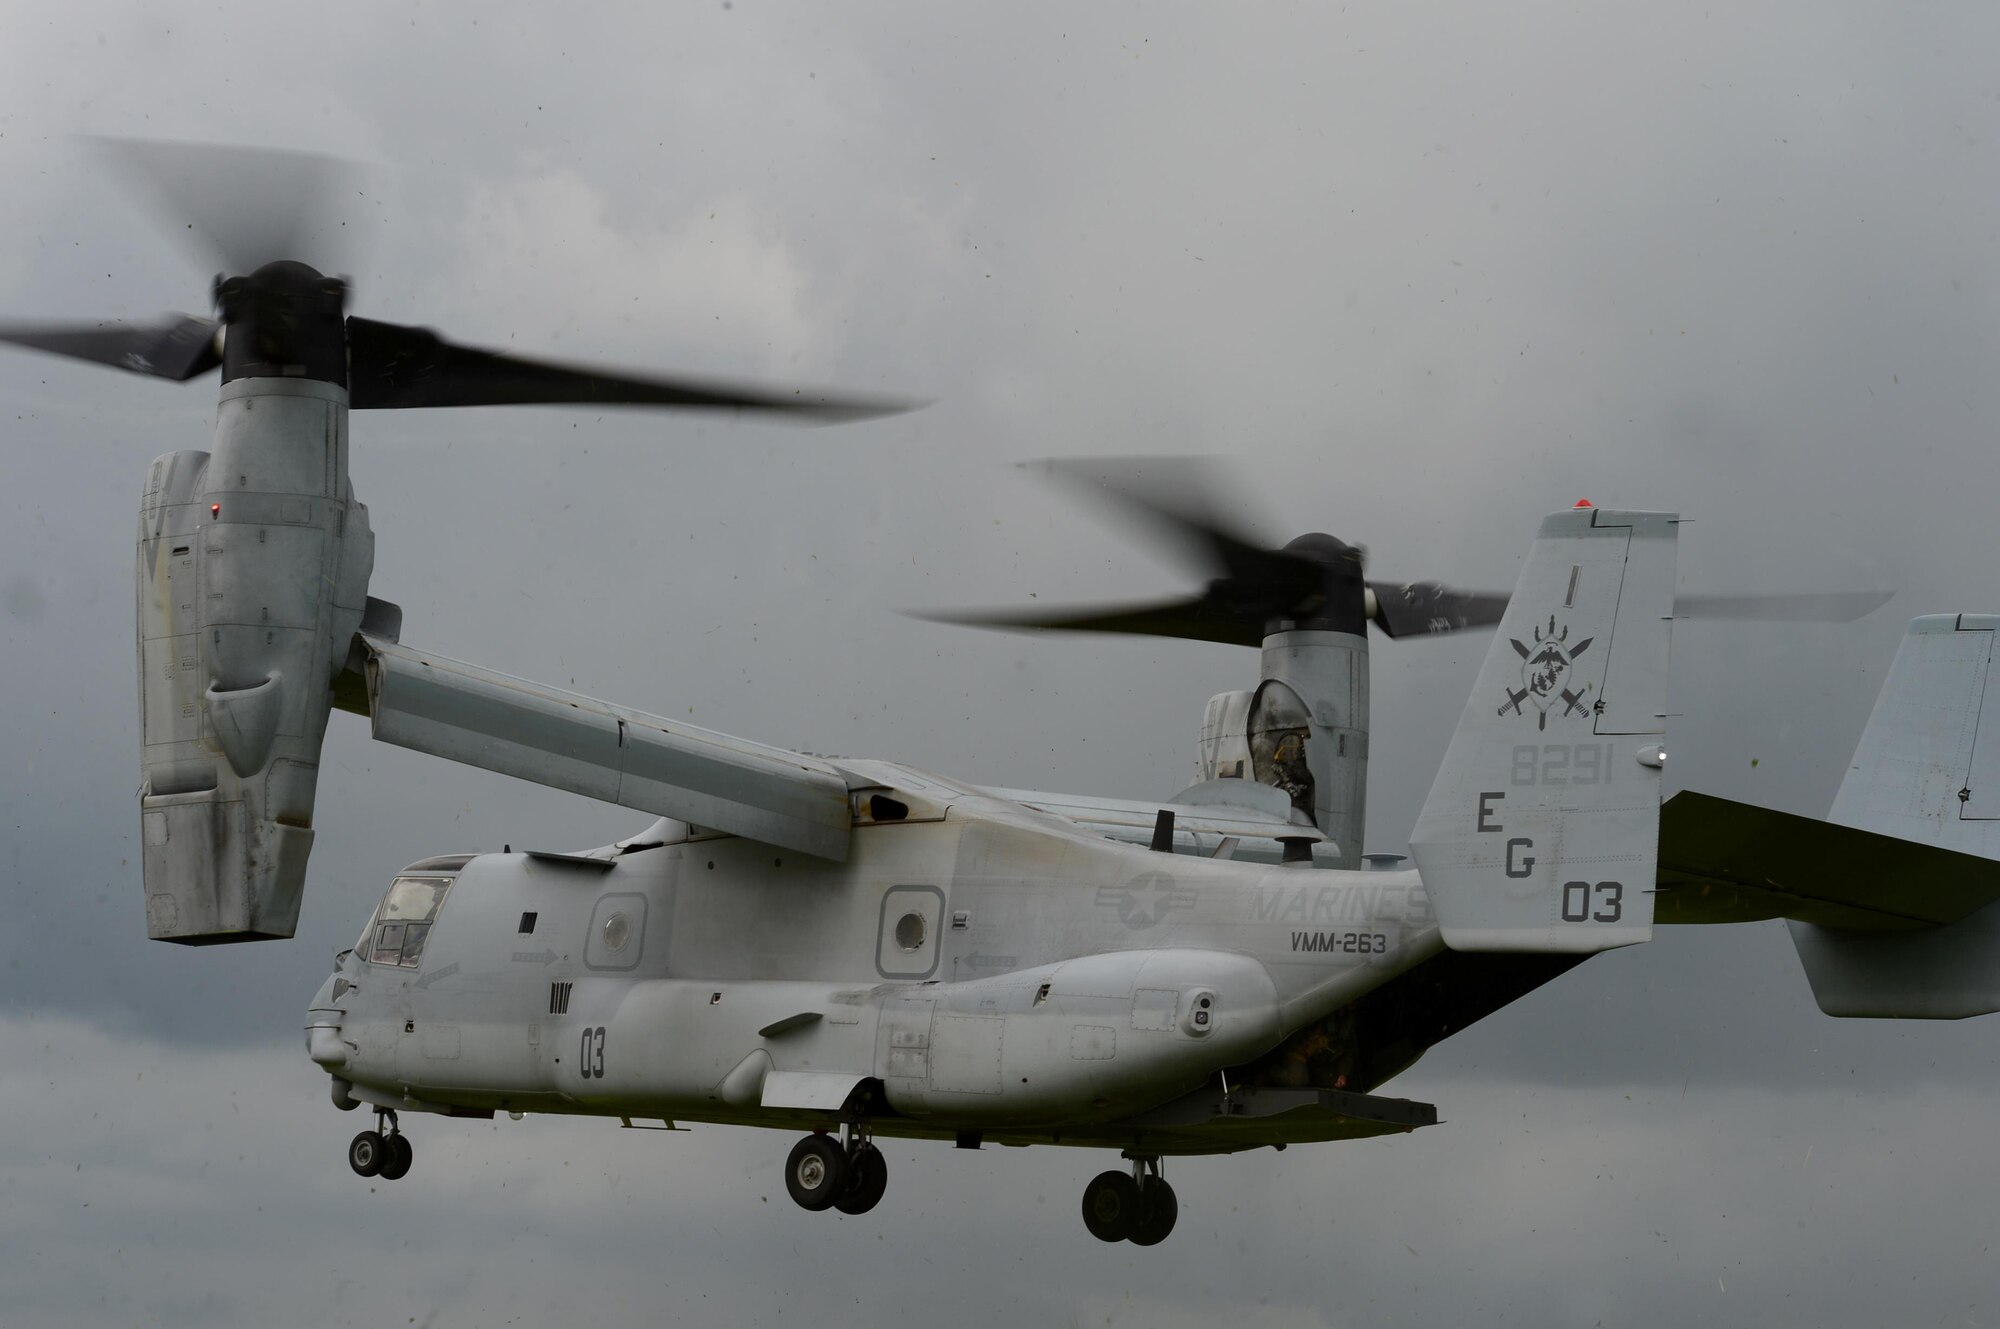 A U.S. Marine Corps MV-22 Osprey prepares to land at Stanford Training Area, England, June 14. U.S. Marines and Sailors, along with U.S. Air Force pararescuemen, participated in a joint exercise to enhance interoperability and to acquire various medical and evacuation techniques through realistic application. (U.S. Air Force photo/Senior Airman Erin Trower)